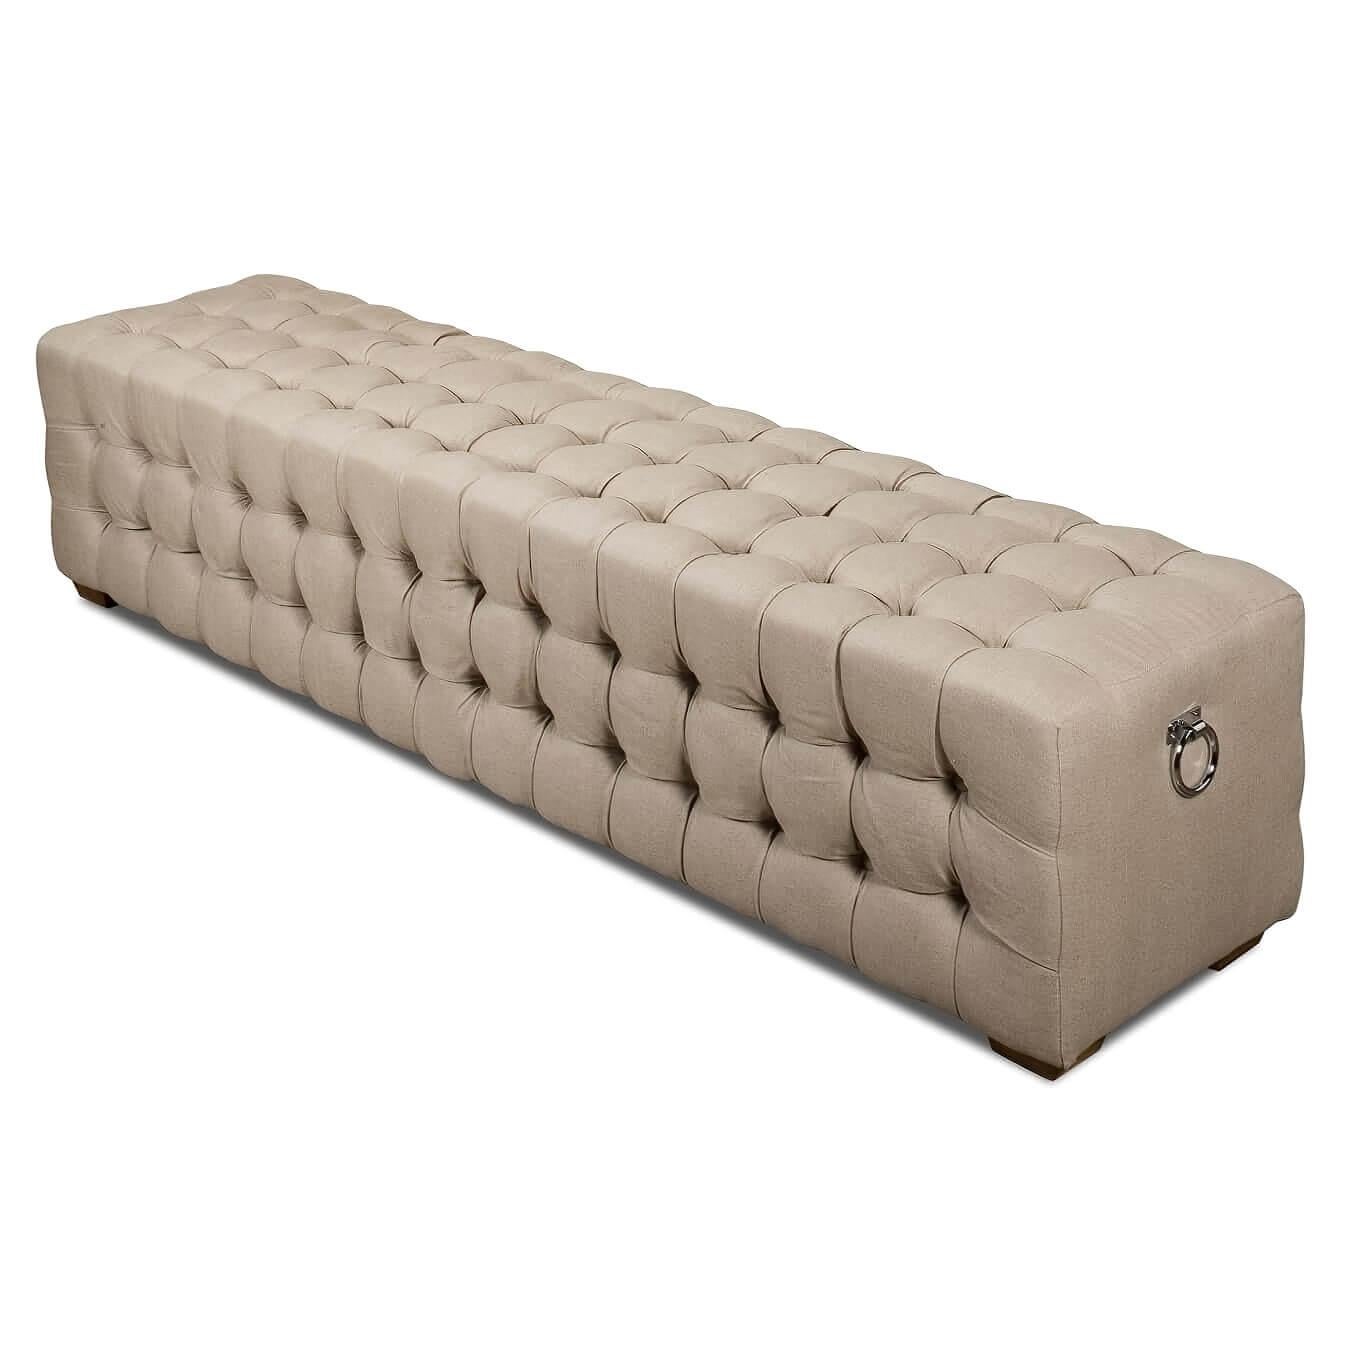 A modern tufted upholstered bench. This bench is covered in luxurious beige linen with a tufted design on its tops and sides. It sits on oak legs in a natural finish and has two silver ring handles on each end.

The neutral color and the timeless